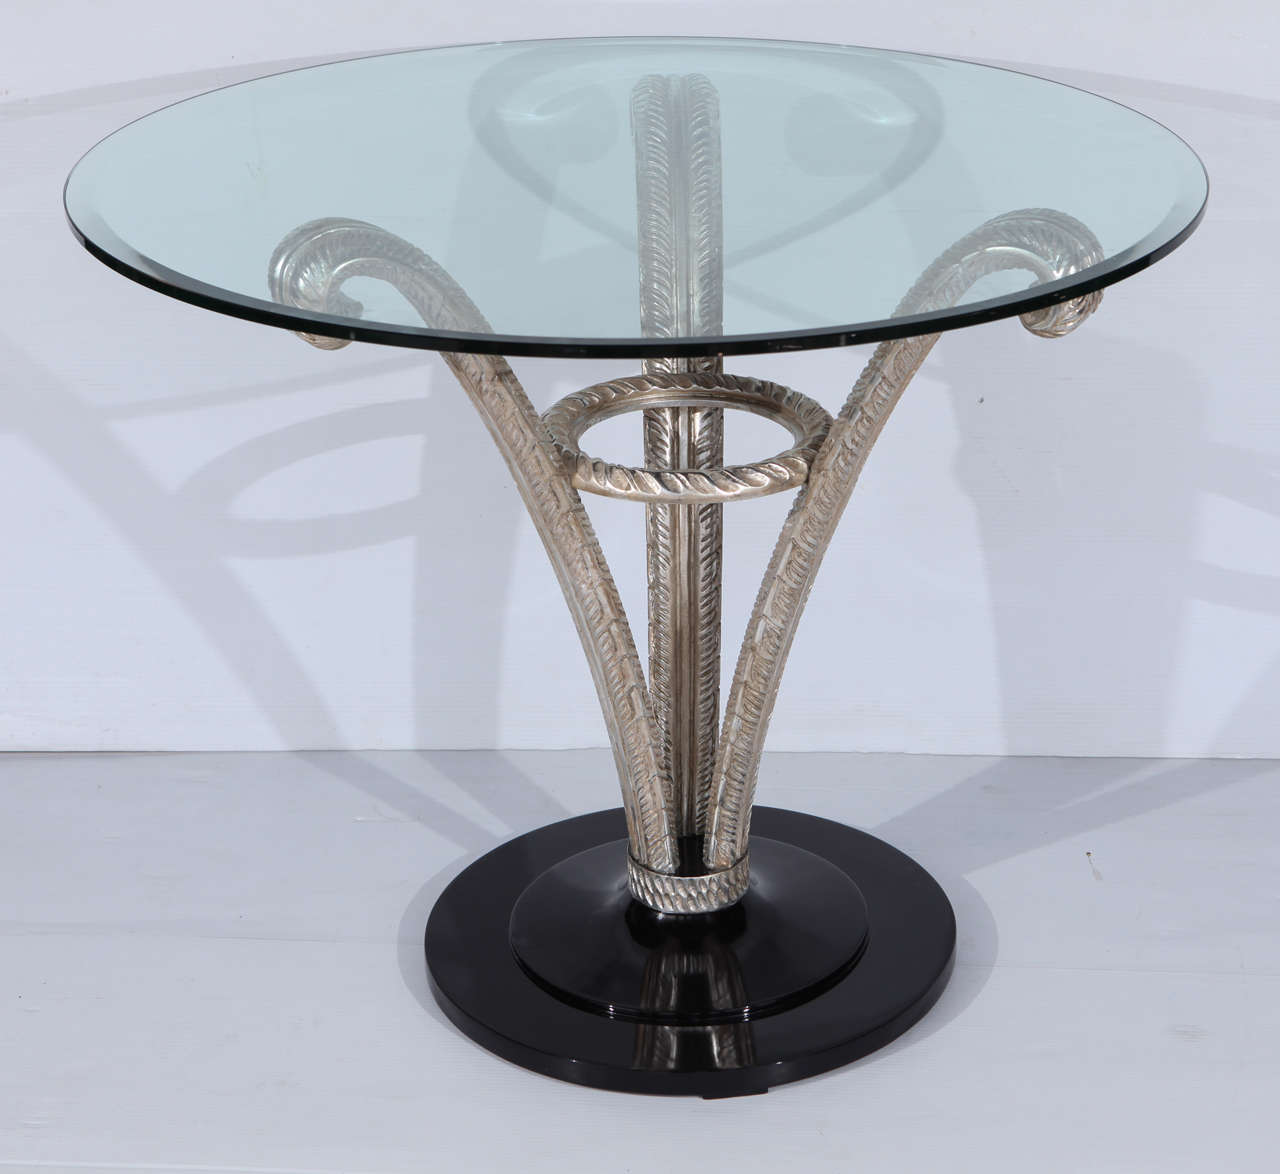 Elegant Pair of Grosfeld House real Silverlefed Tables
newly refinished